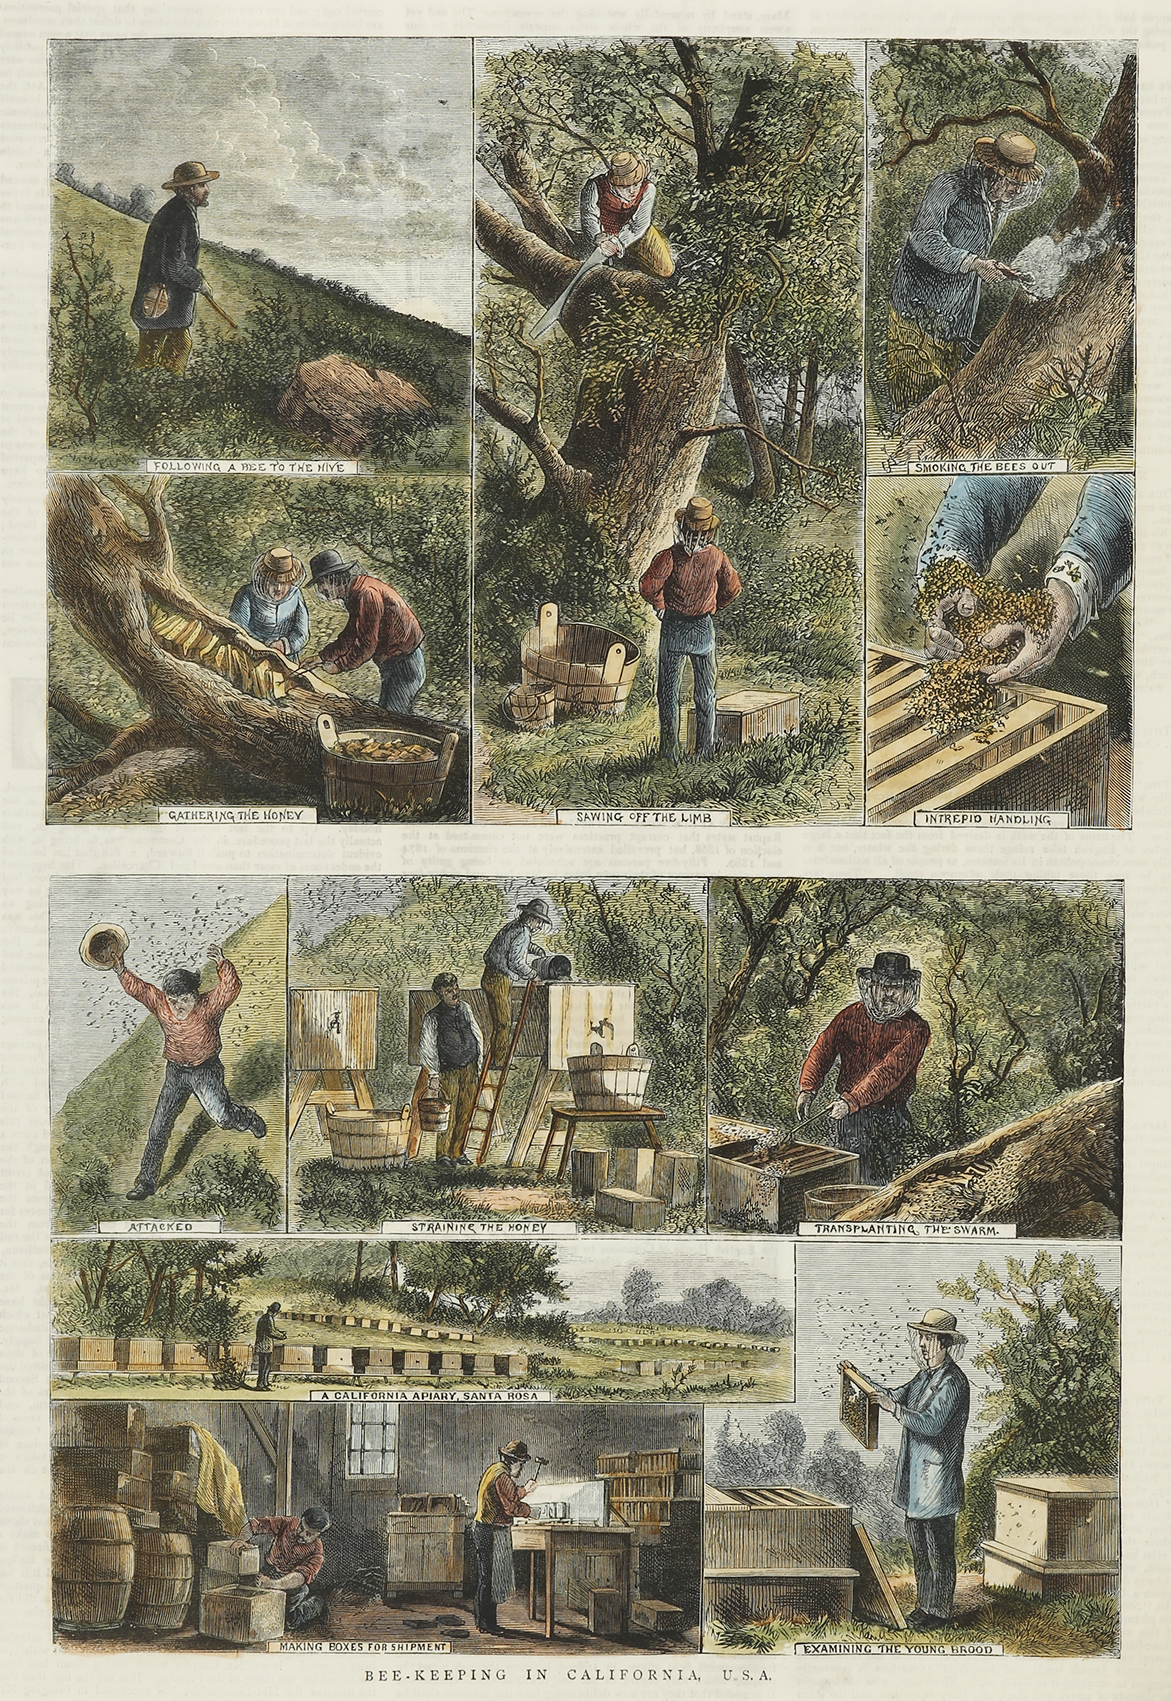 Bee-Keeping in California, U.S.A. - Antique Print from 1881